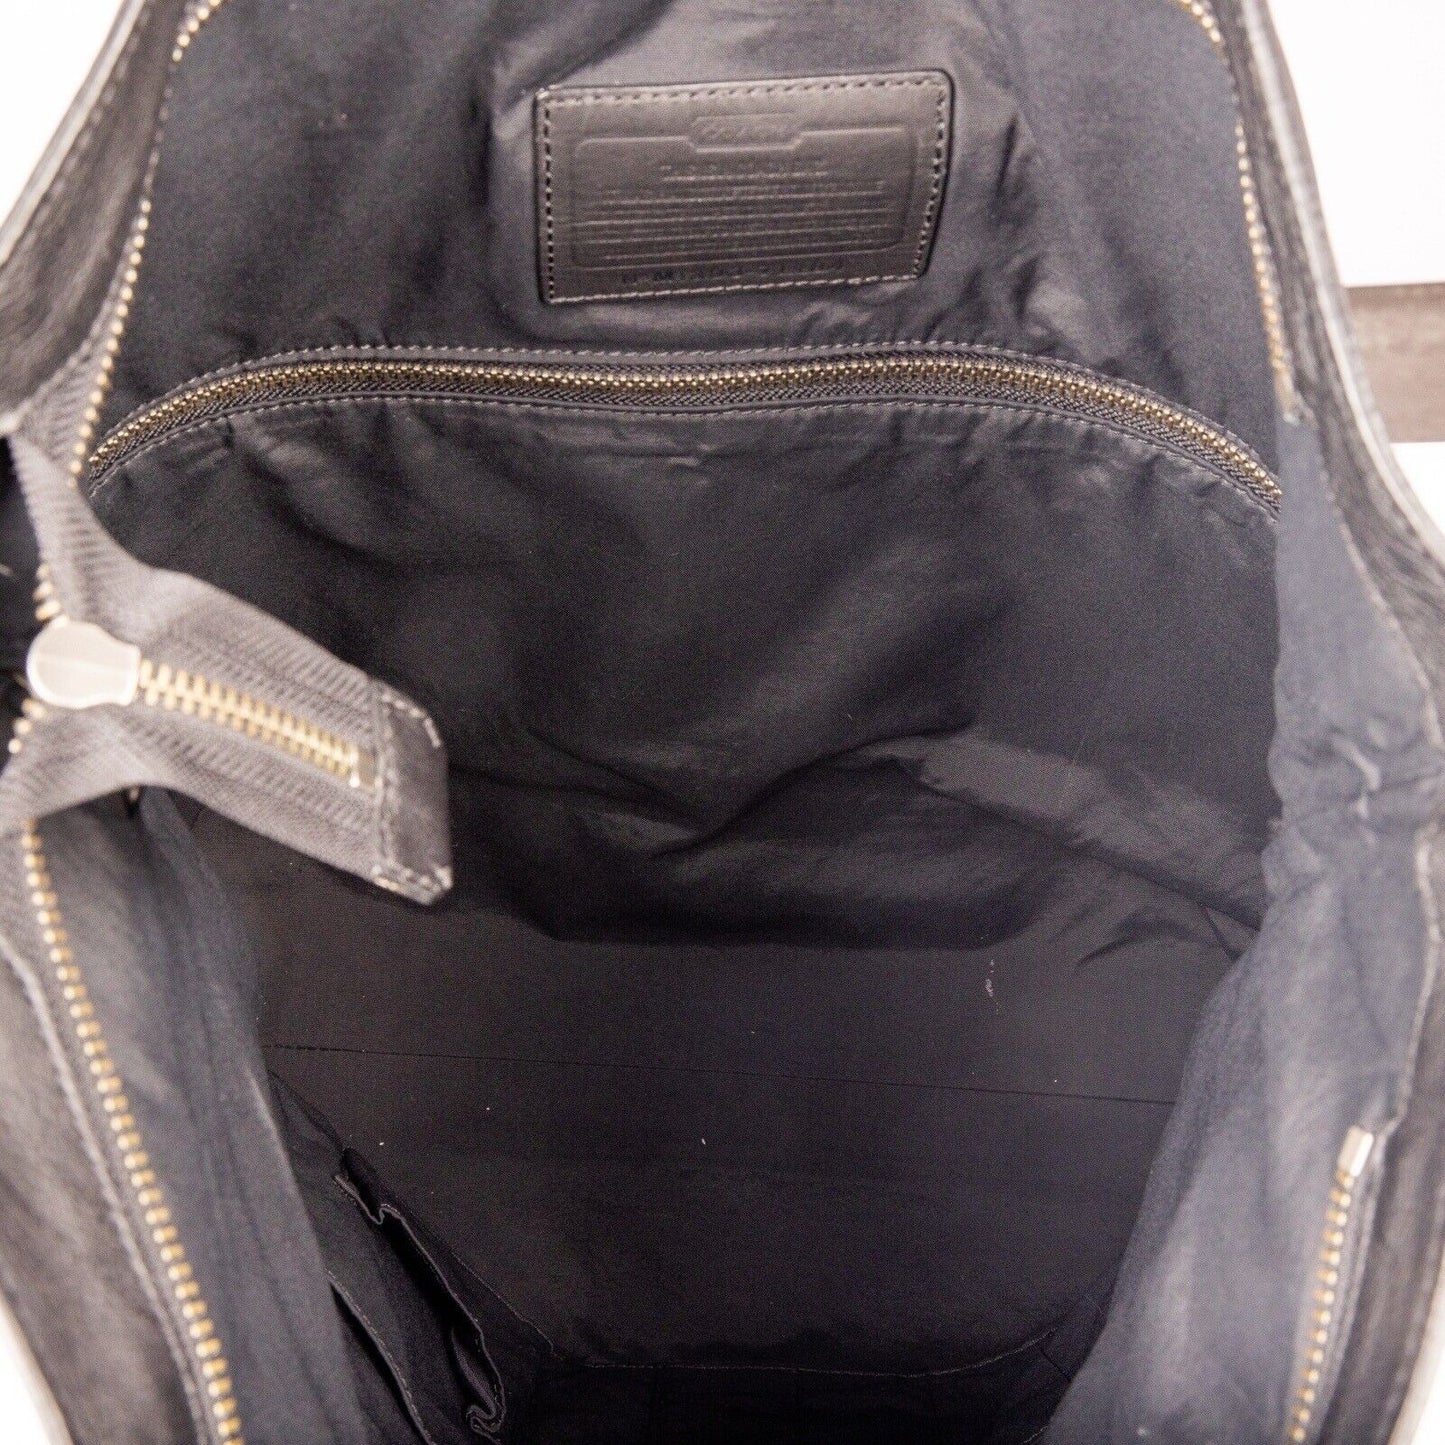 Inside View Of Leather Convertible Messenger Bag